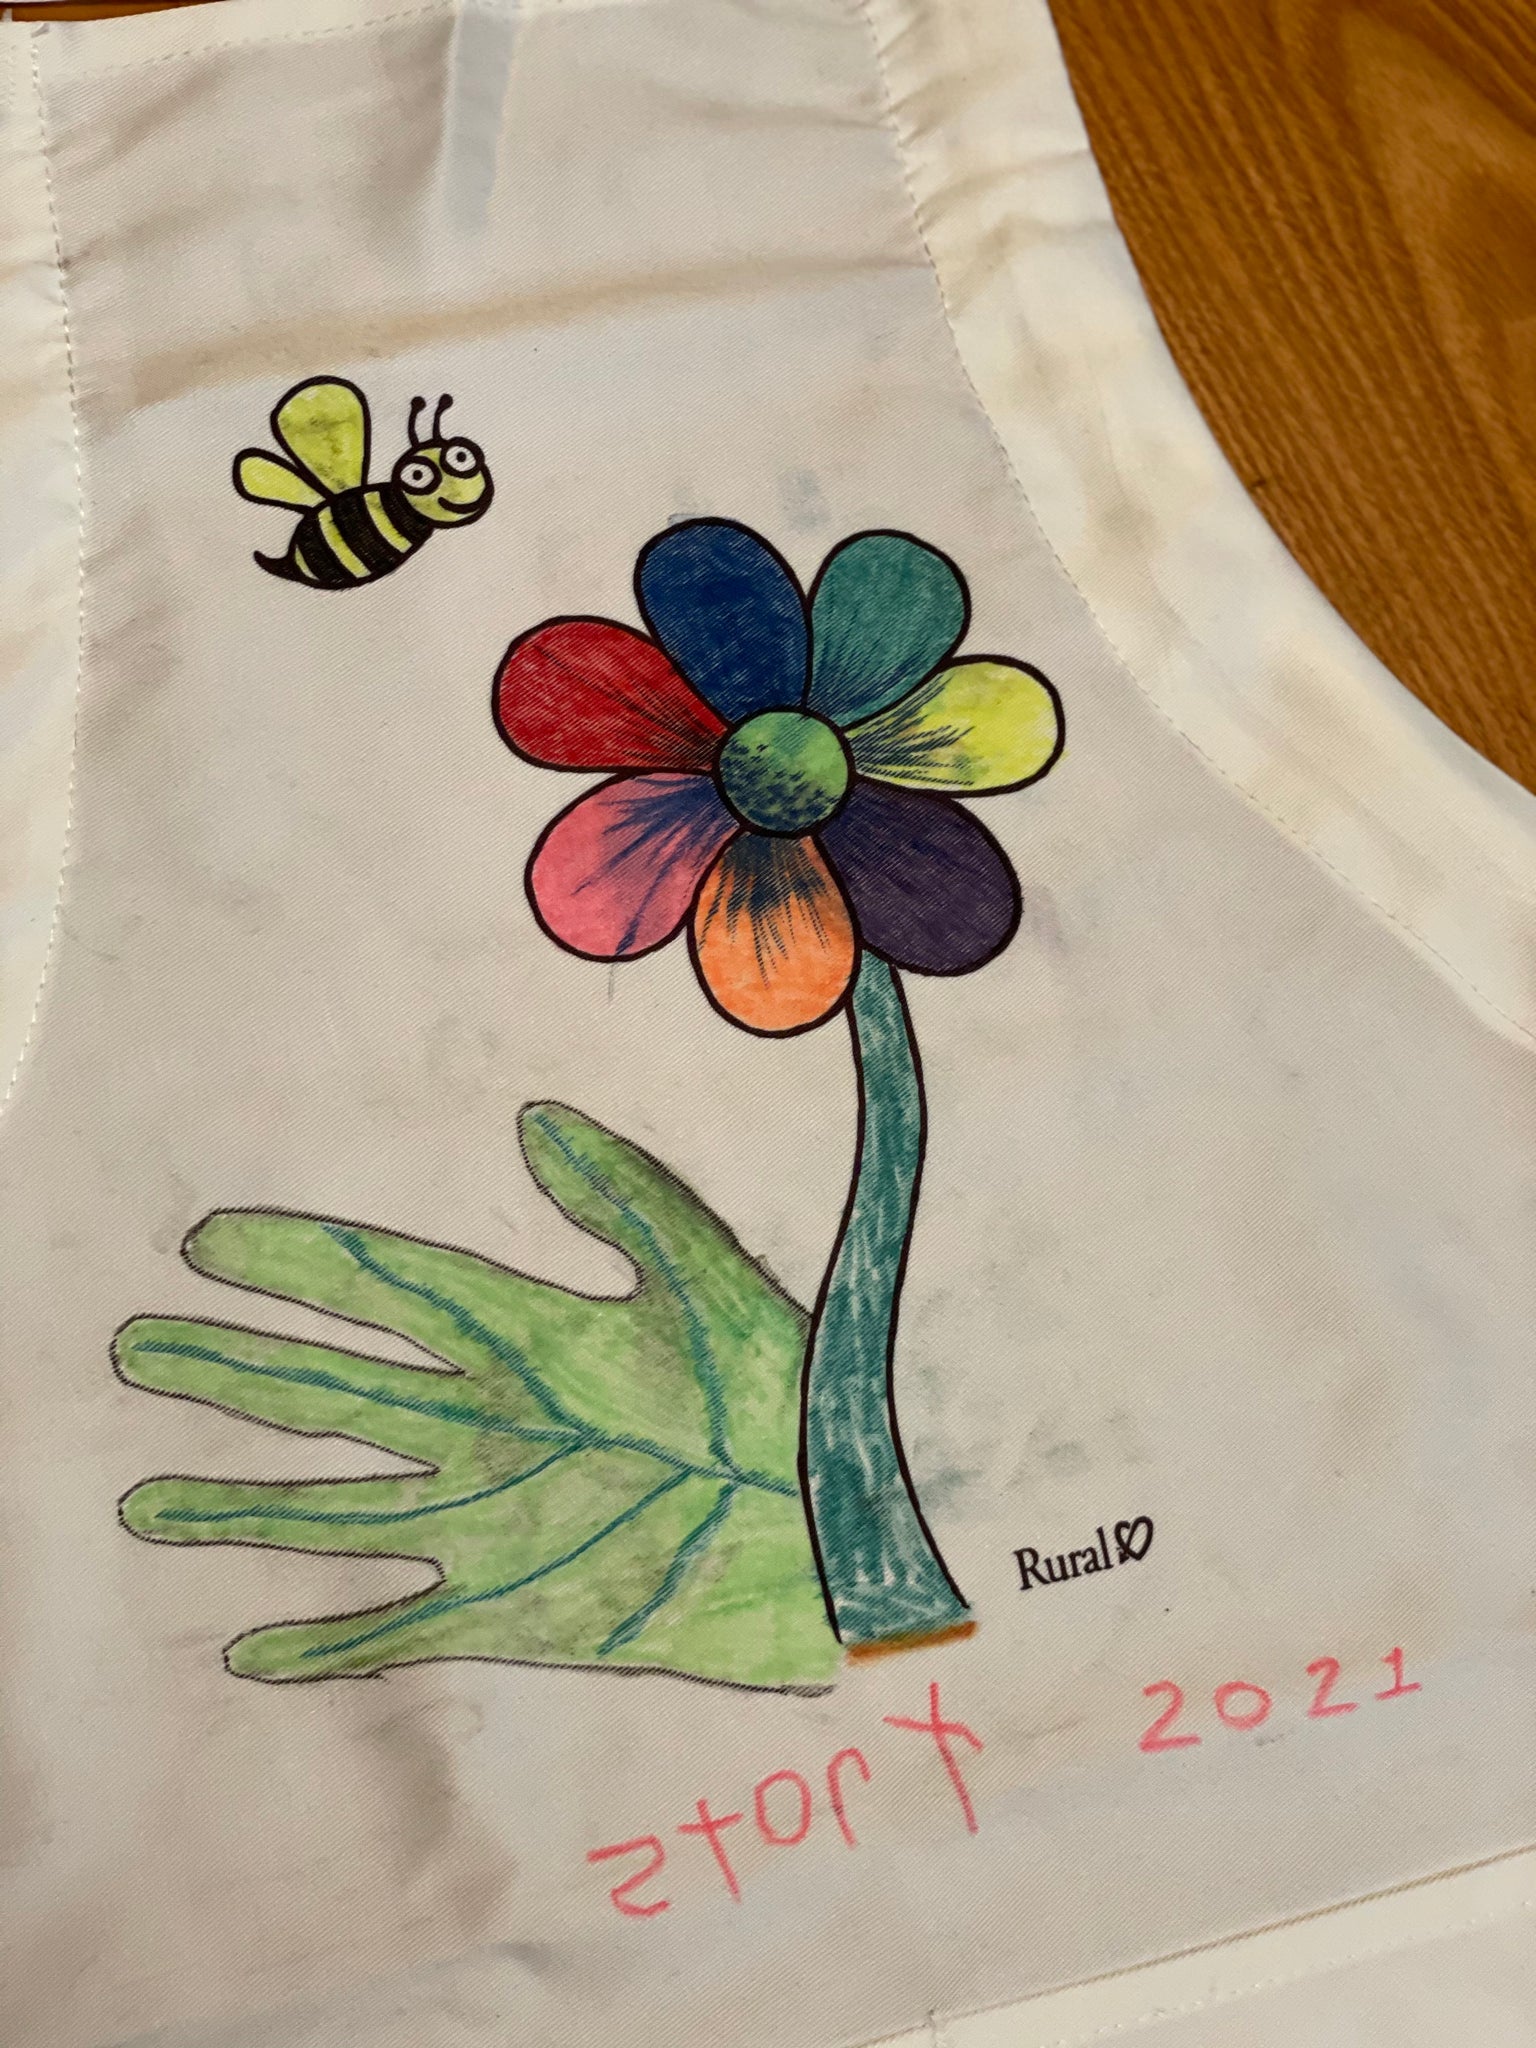 Rural Heart by Rene' Earnhardt DIY Mother's Day Apron.